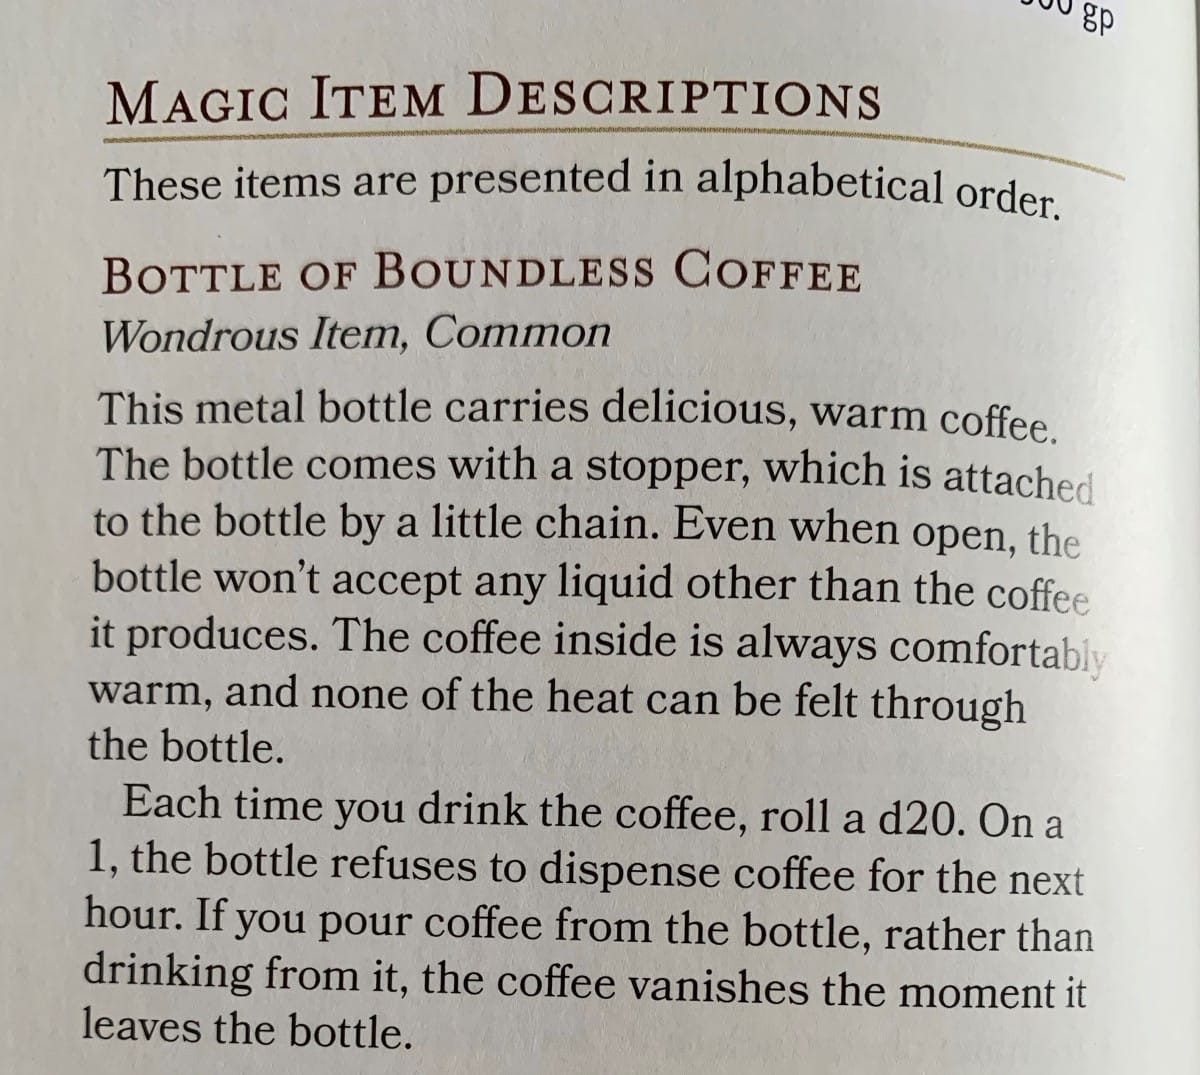 The description of a magic item called Bottle of Boundless Coffee